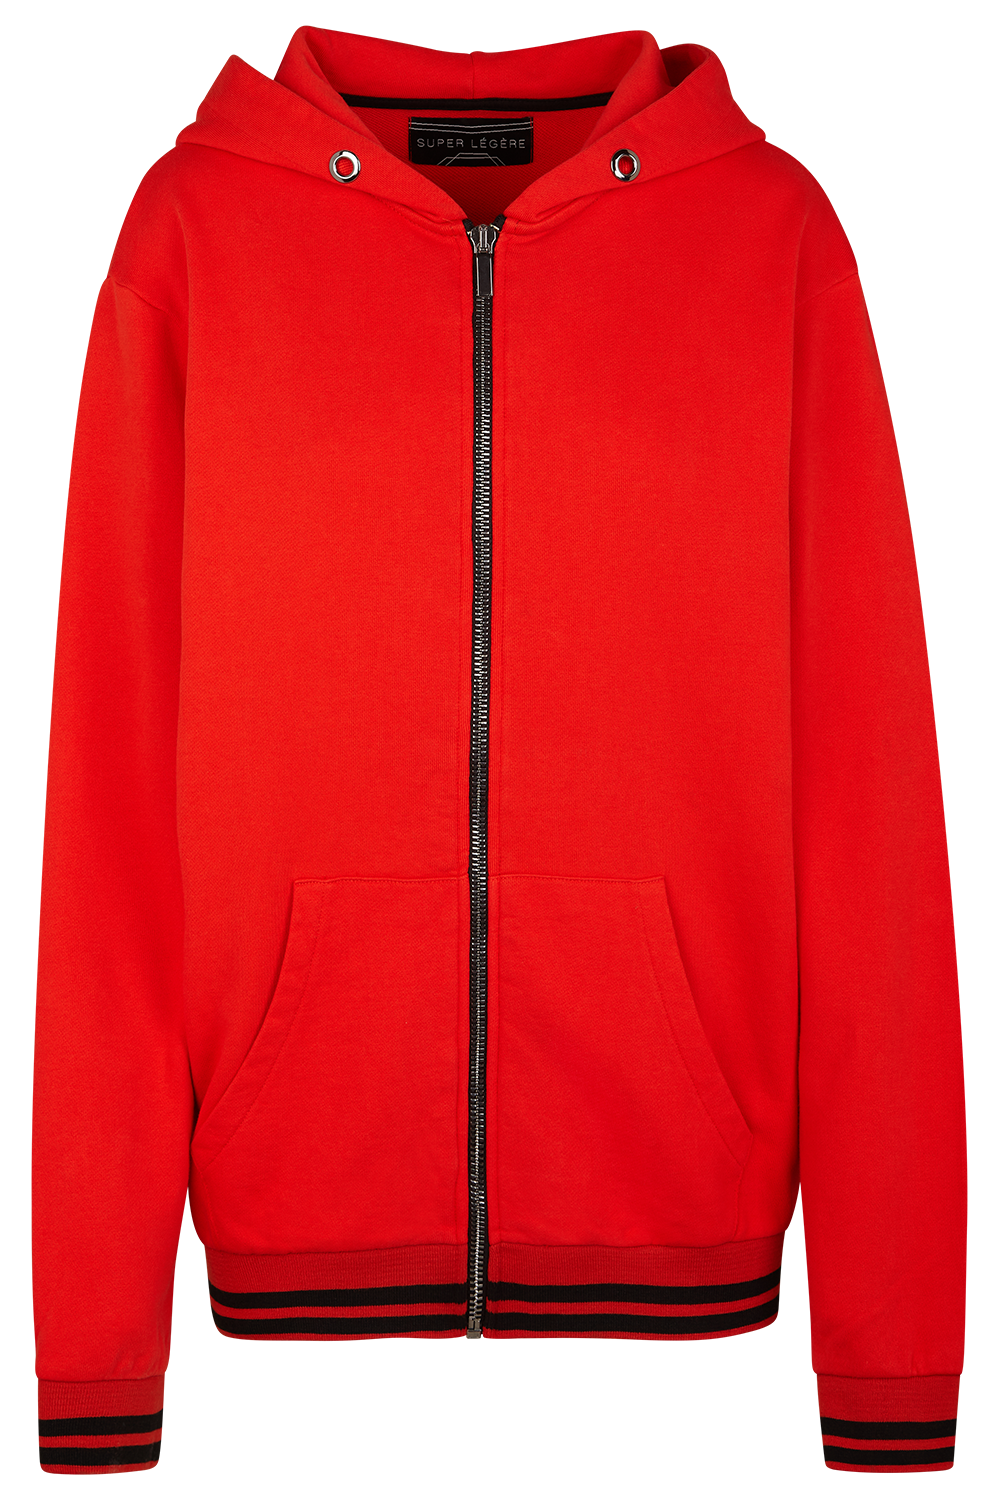 Loose Fit Zipper Hoody - SUPER HIGH Coral Red